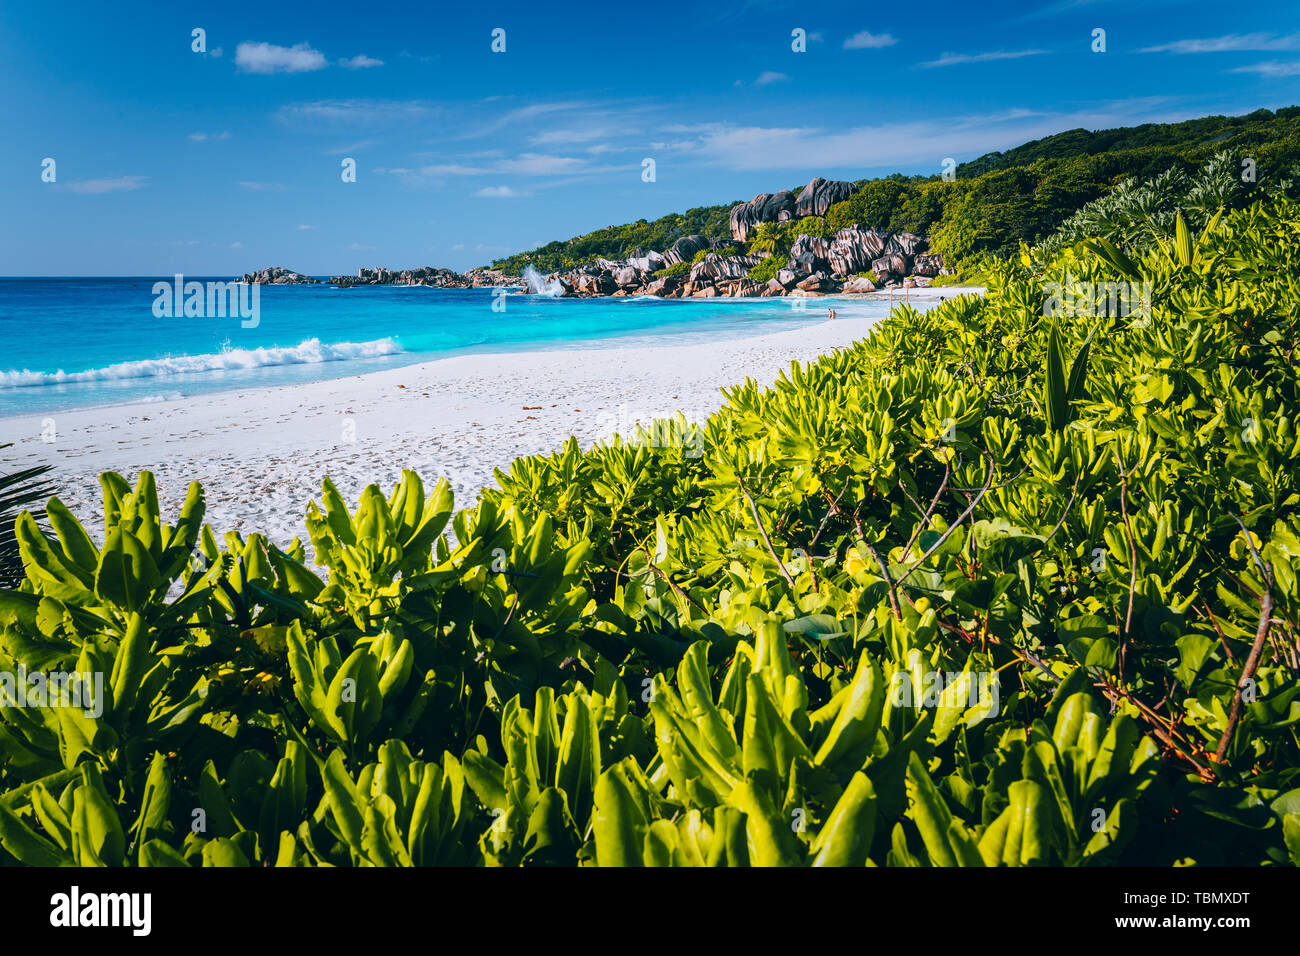 Eden Picturesque Grand Anse, La Digue island, Seychelles. Lush green vegetation frame white sand paradise beach with turquoise waves and unique Stock Photo